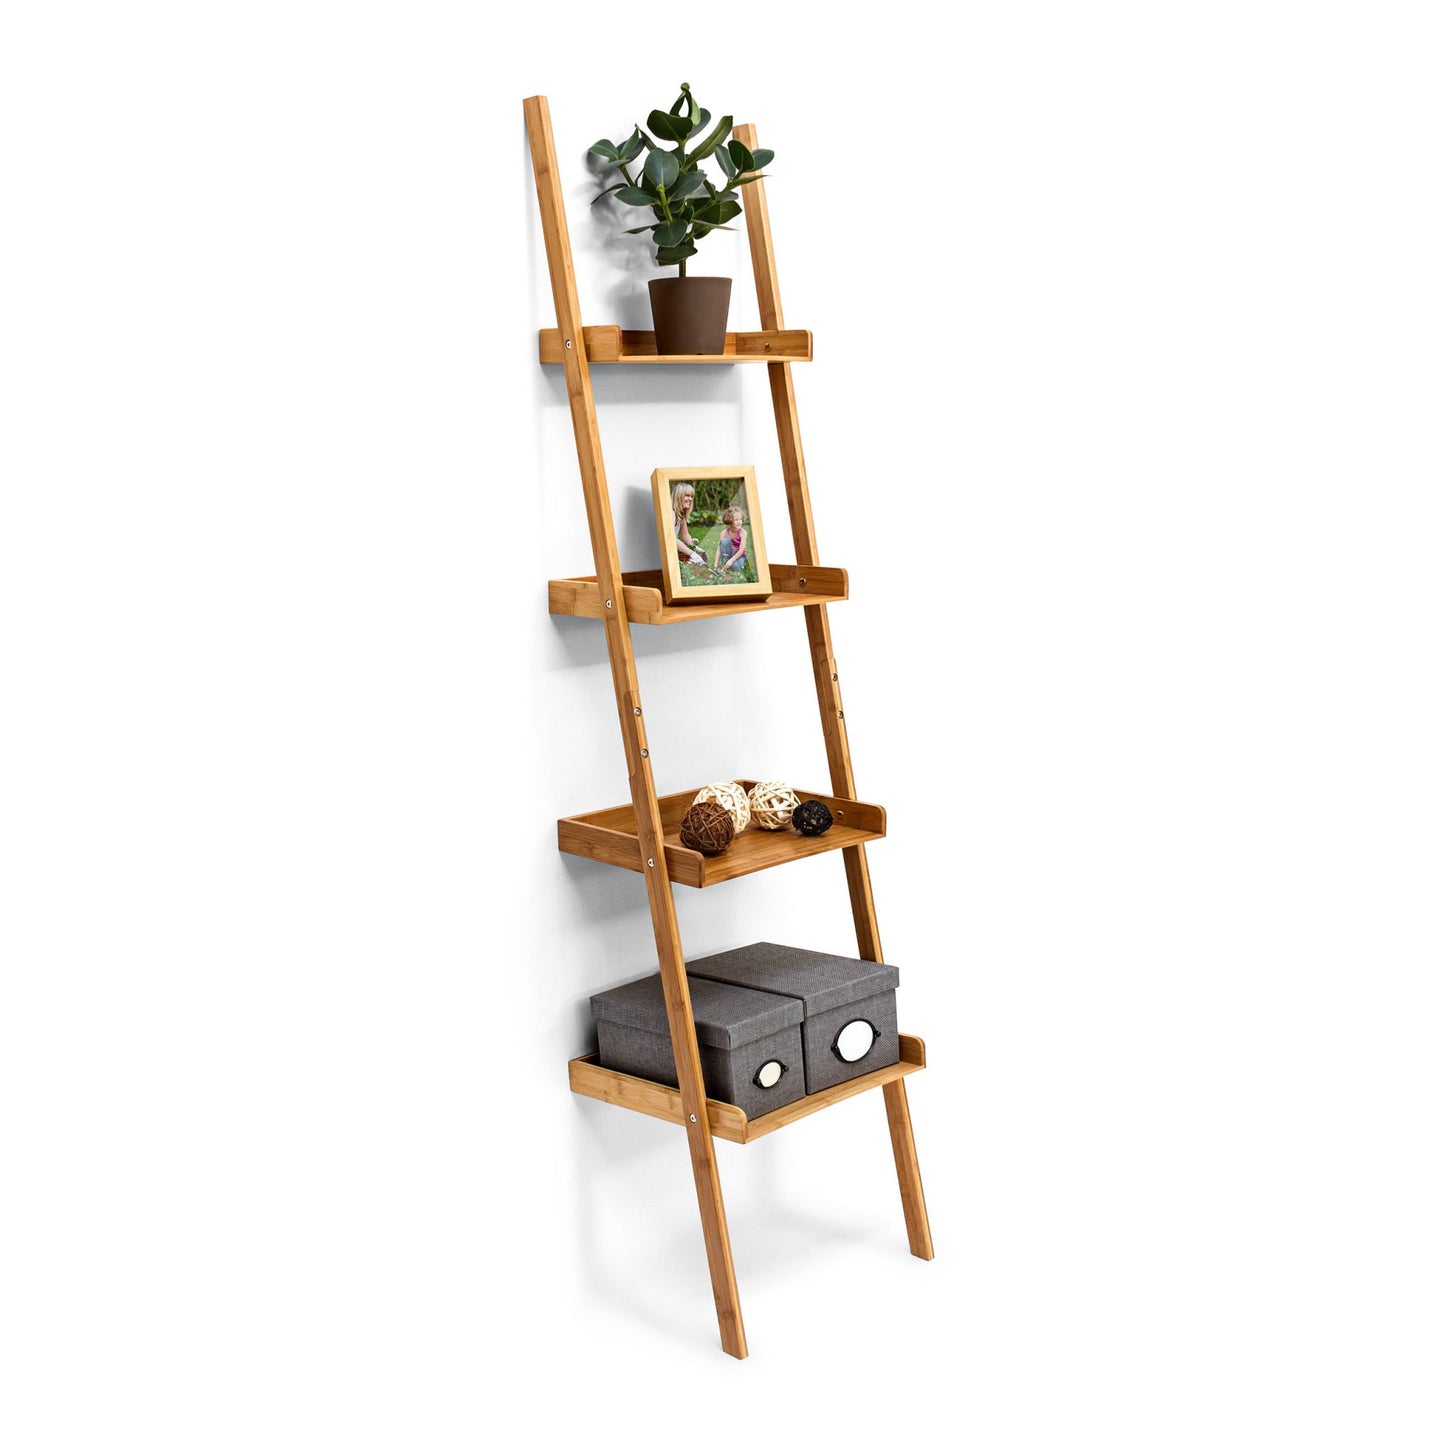 RelaxDays Bamboo ladder shelving unit, 4 tiers Bamboo Bathrooms